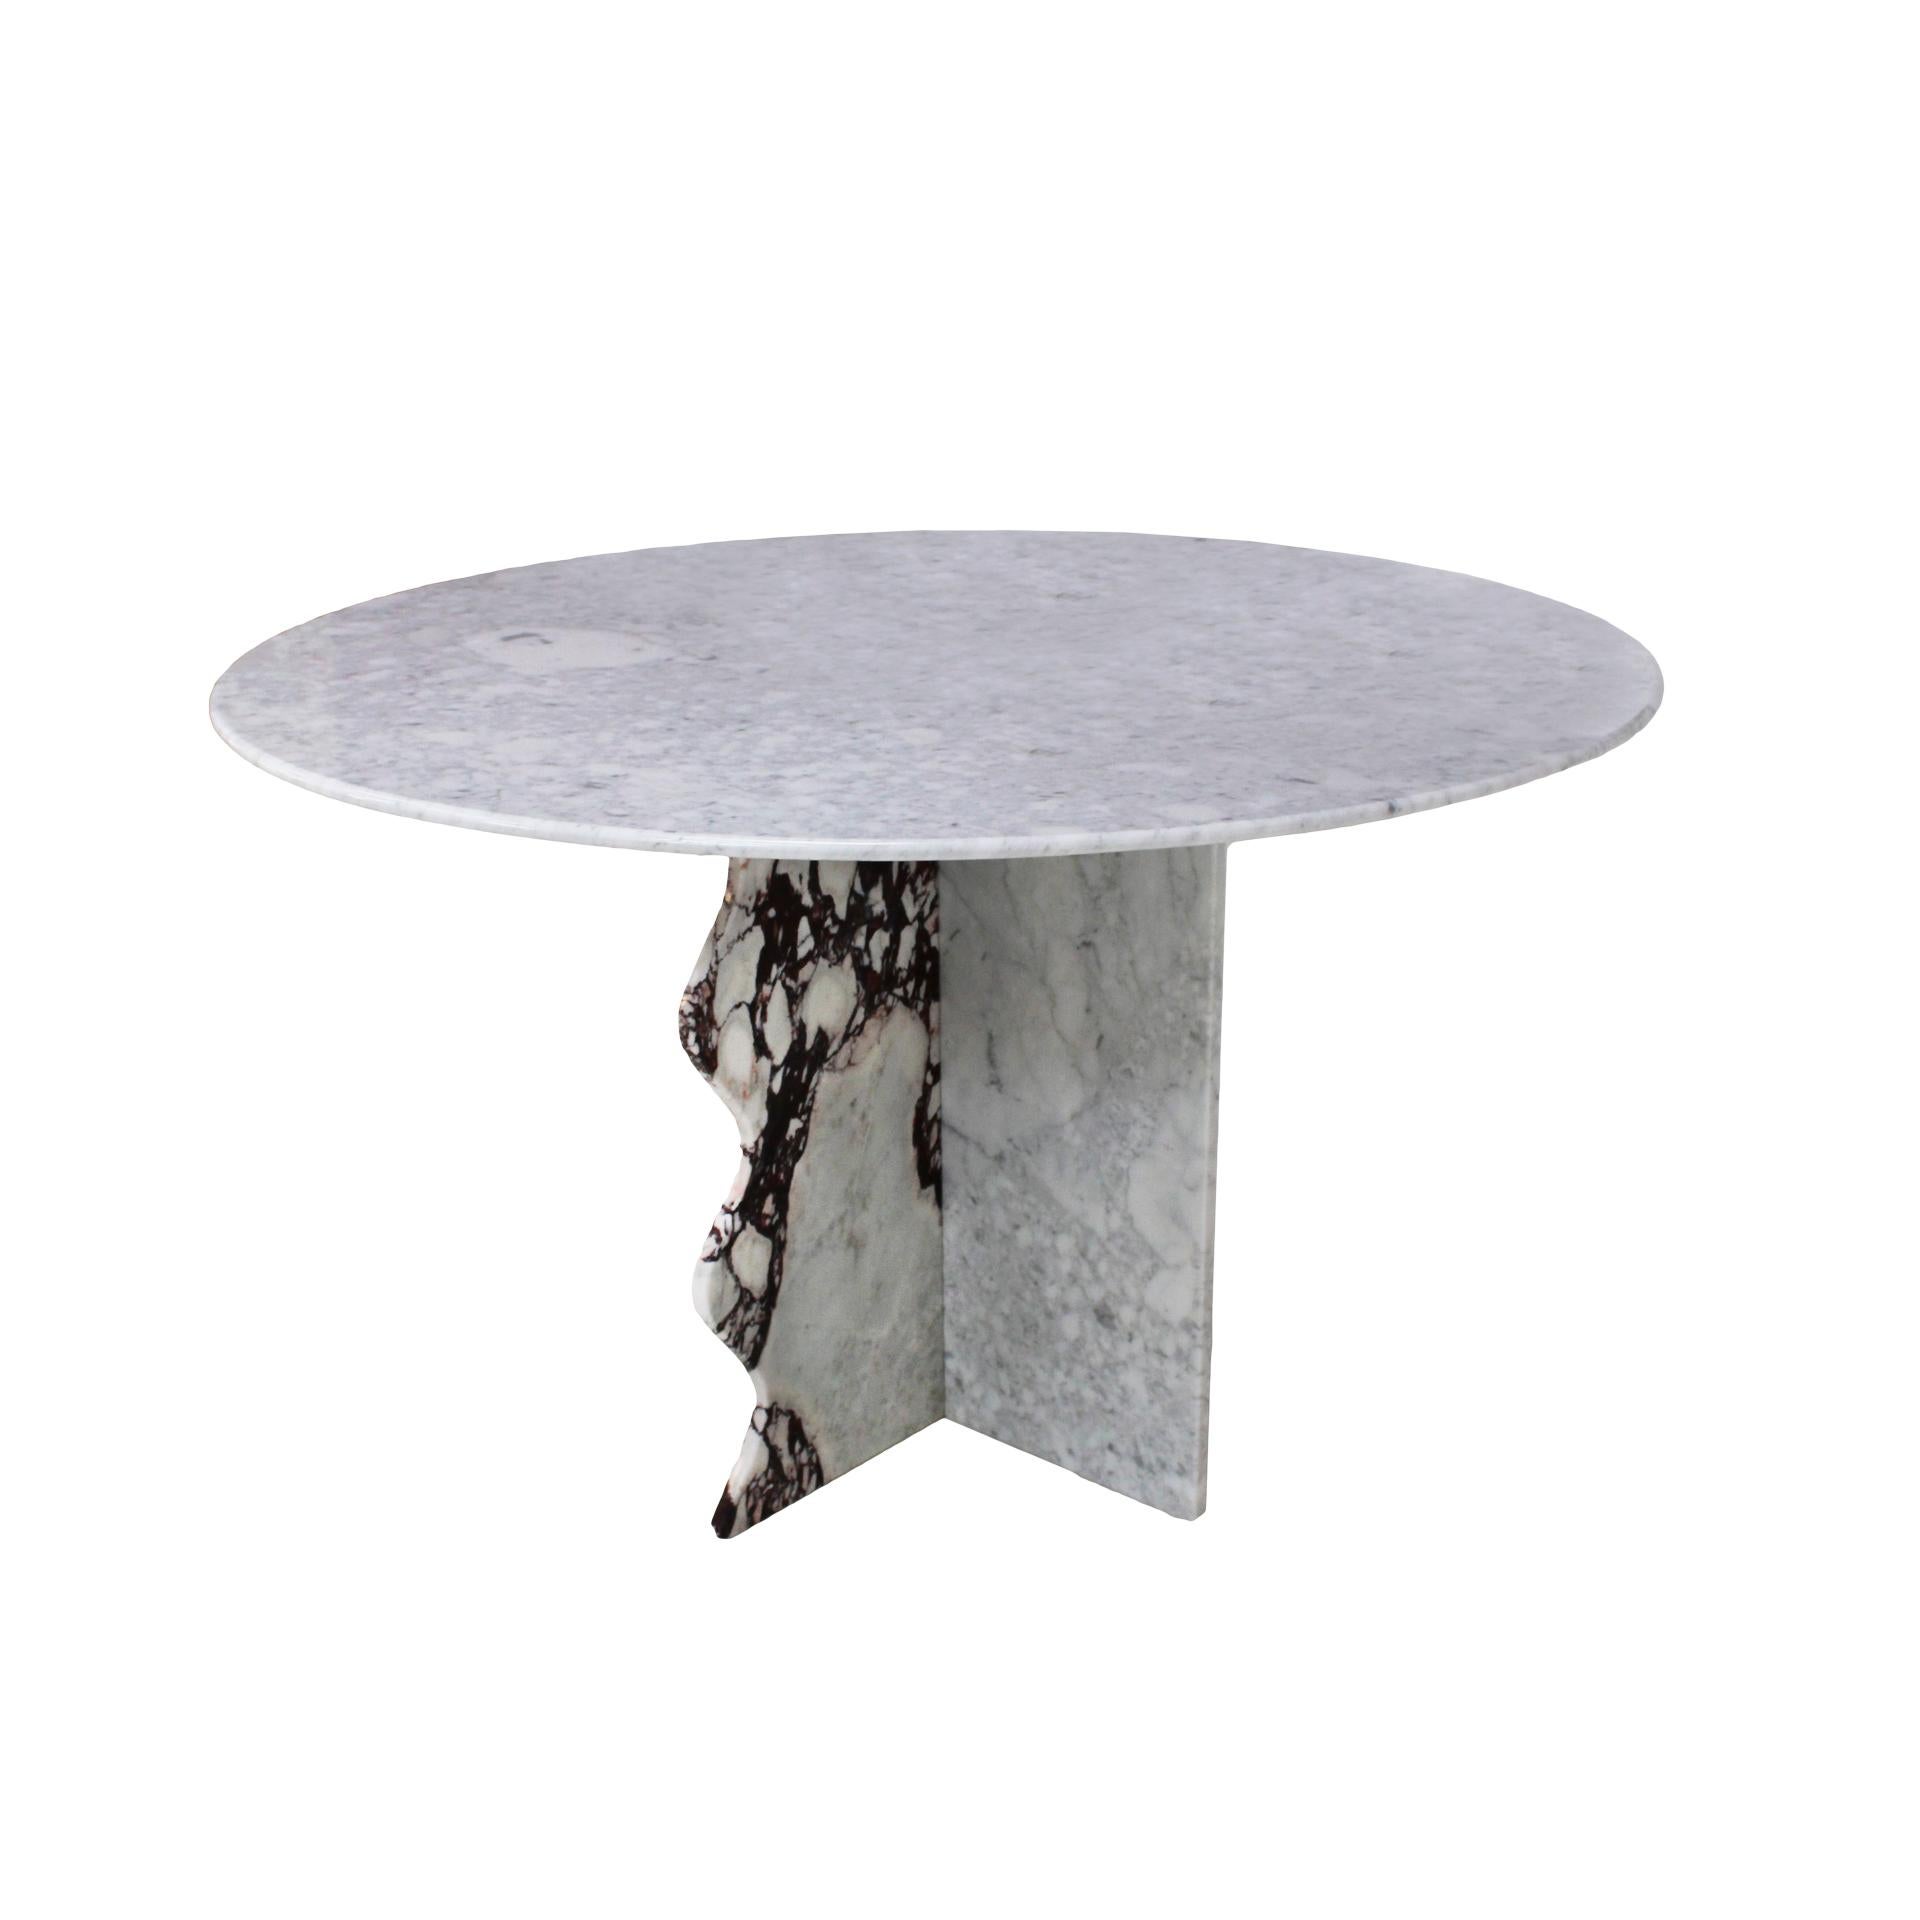 Circular table designed and produced by L.A. Studio. Made of Carrara and Calacatta Viola marble. 

Our main target is customer satisfaction, so we include in the price for this item professional and custom made packing.

Every item LA Studio offers